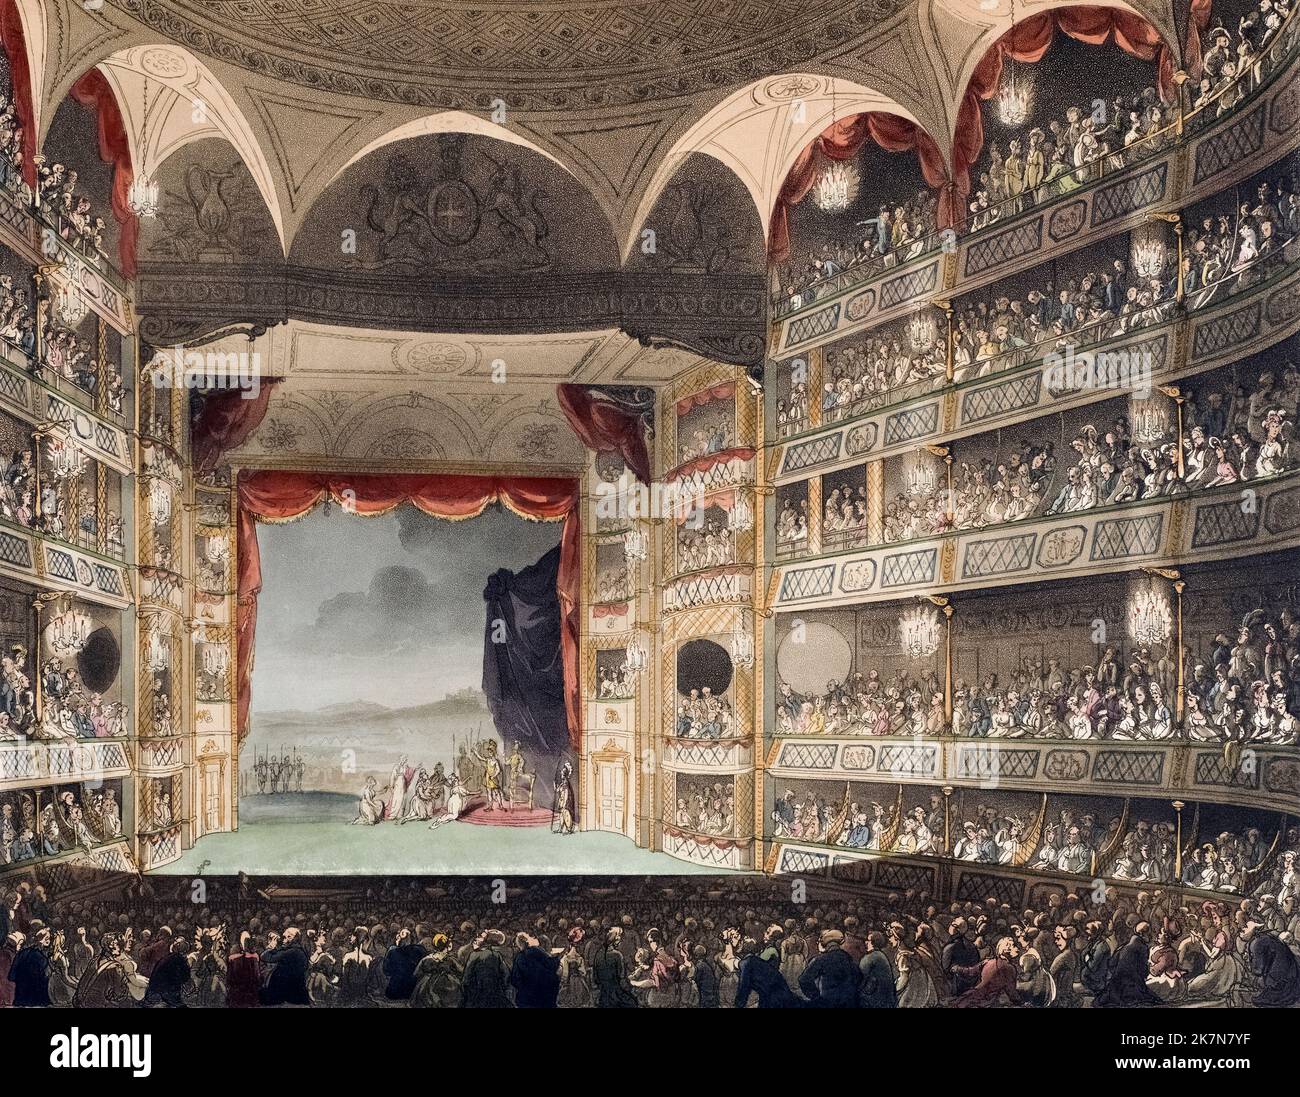 Drury Lane Theatre.  Circa 1808.  After a work by August Pugin and Thomas Rowlandson in the Microcosm of London, published in three volumes between 1808 and 1810 by Rudolph Ackermann.   Pugin was the artist responsible for the architectural elements in the Microcosm pictures; Thomas Rowlandson was hired to add the lively human figures. Stock Photo